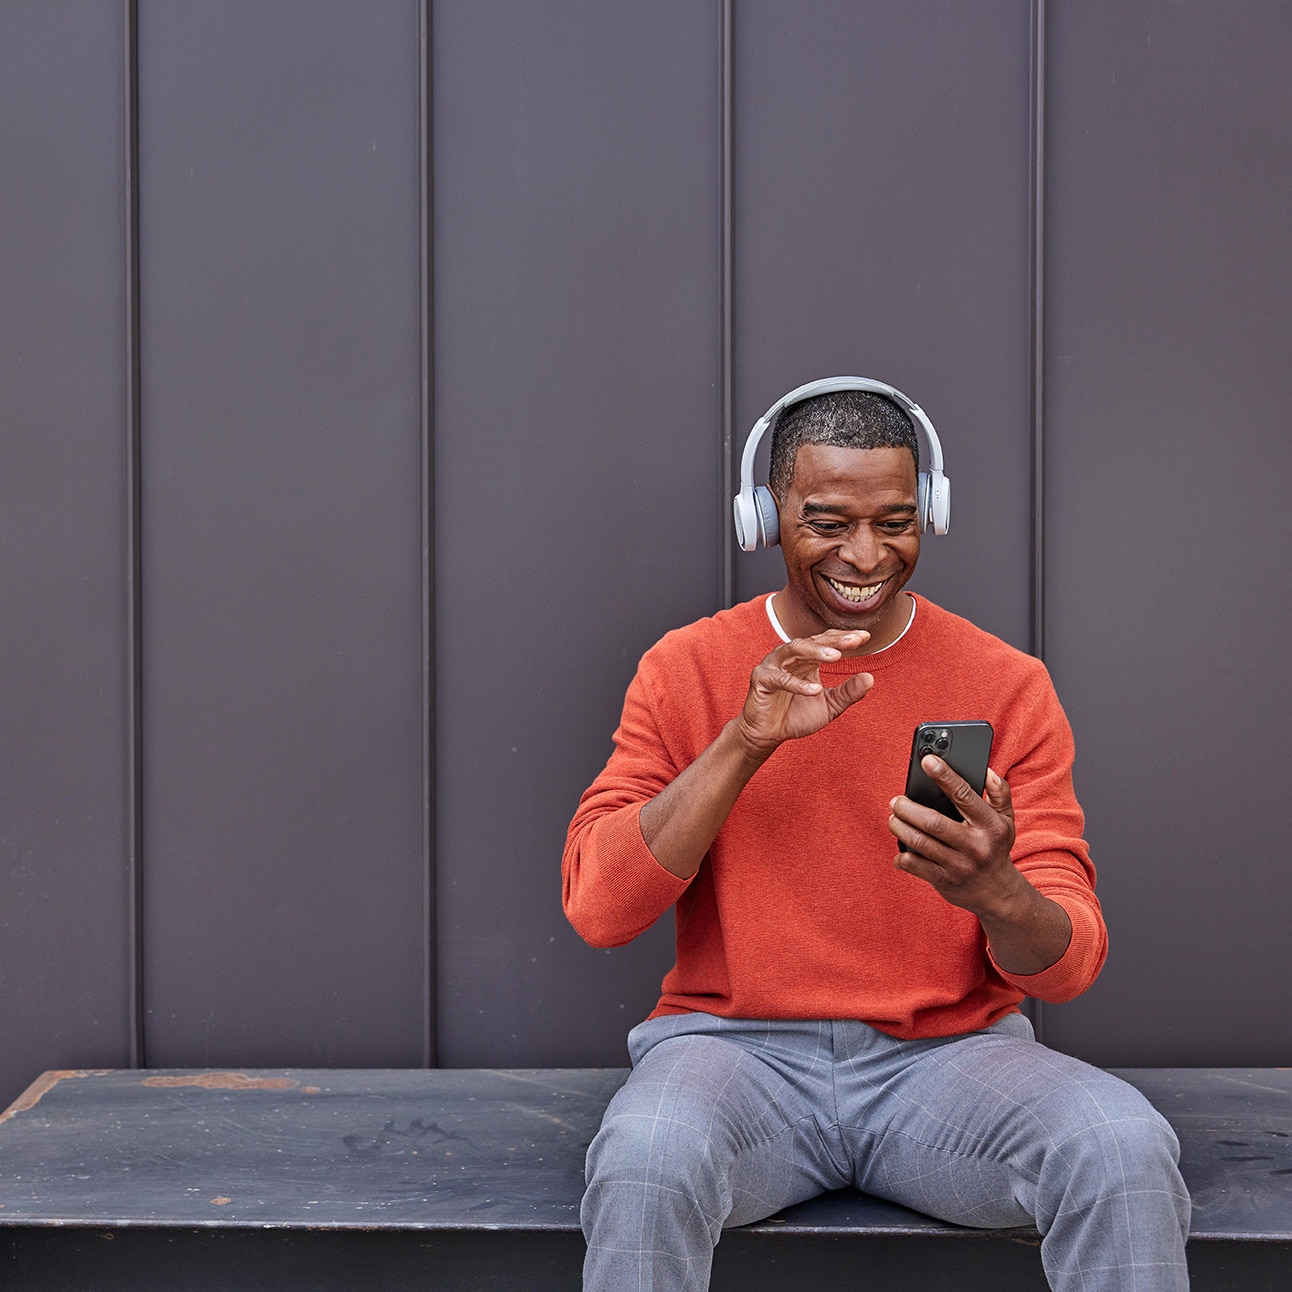 A person sitting on a bench wears a headset  while in a video call on his mobile devices.